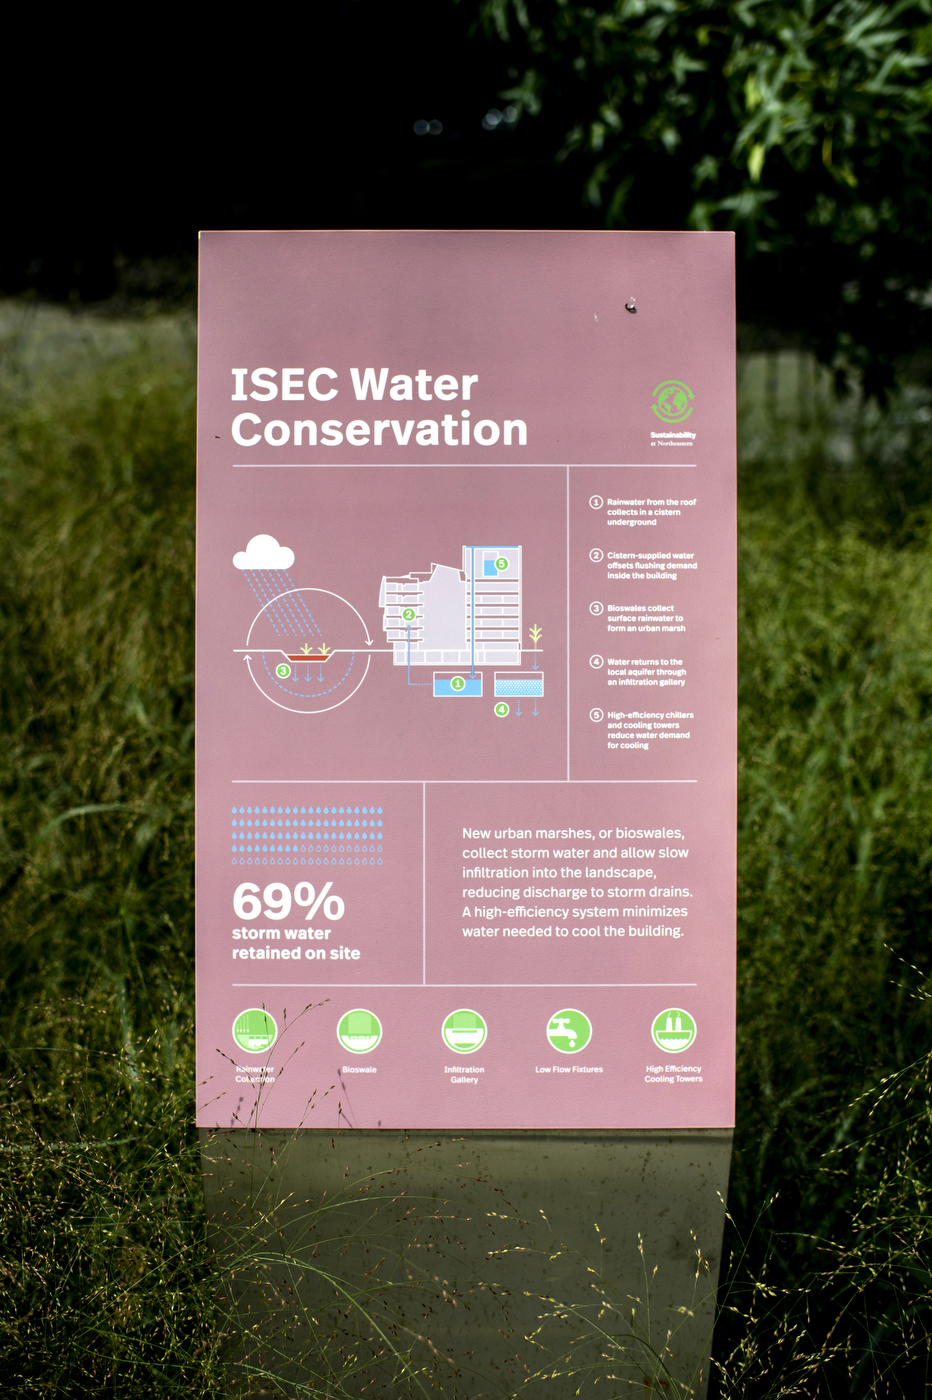 A pink sign with white lettering and green and blue images shows plans for water conservation due to drought outside the ISEC building on Northeastern's boston campus. The sign is placed in some water surrounded by green plants.